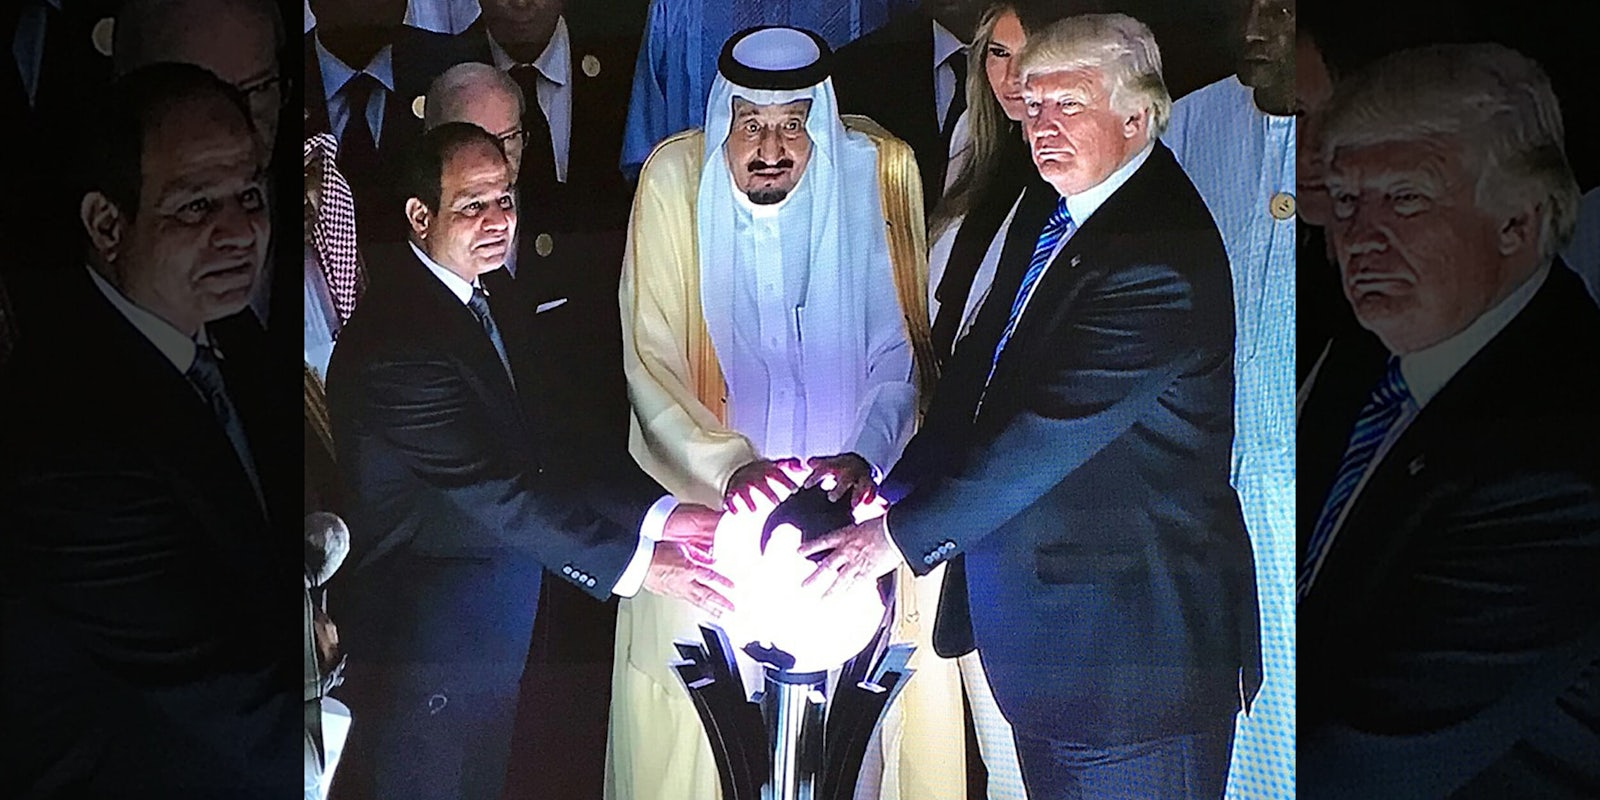 Donald Trump with Saudi King and a glowing orb